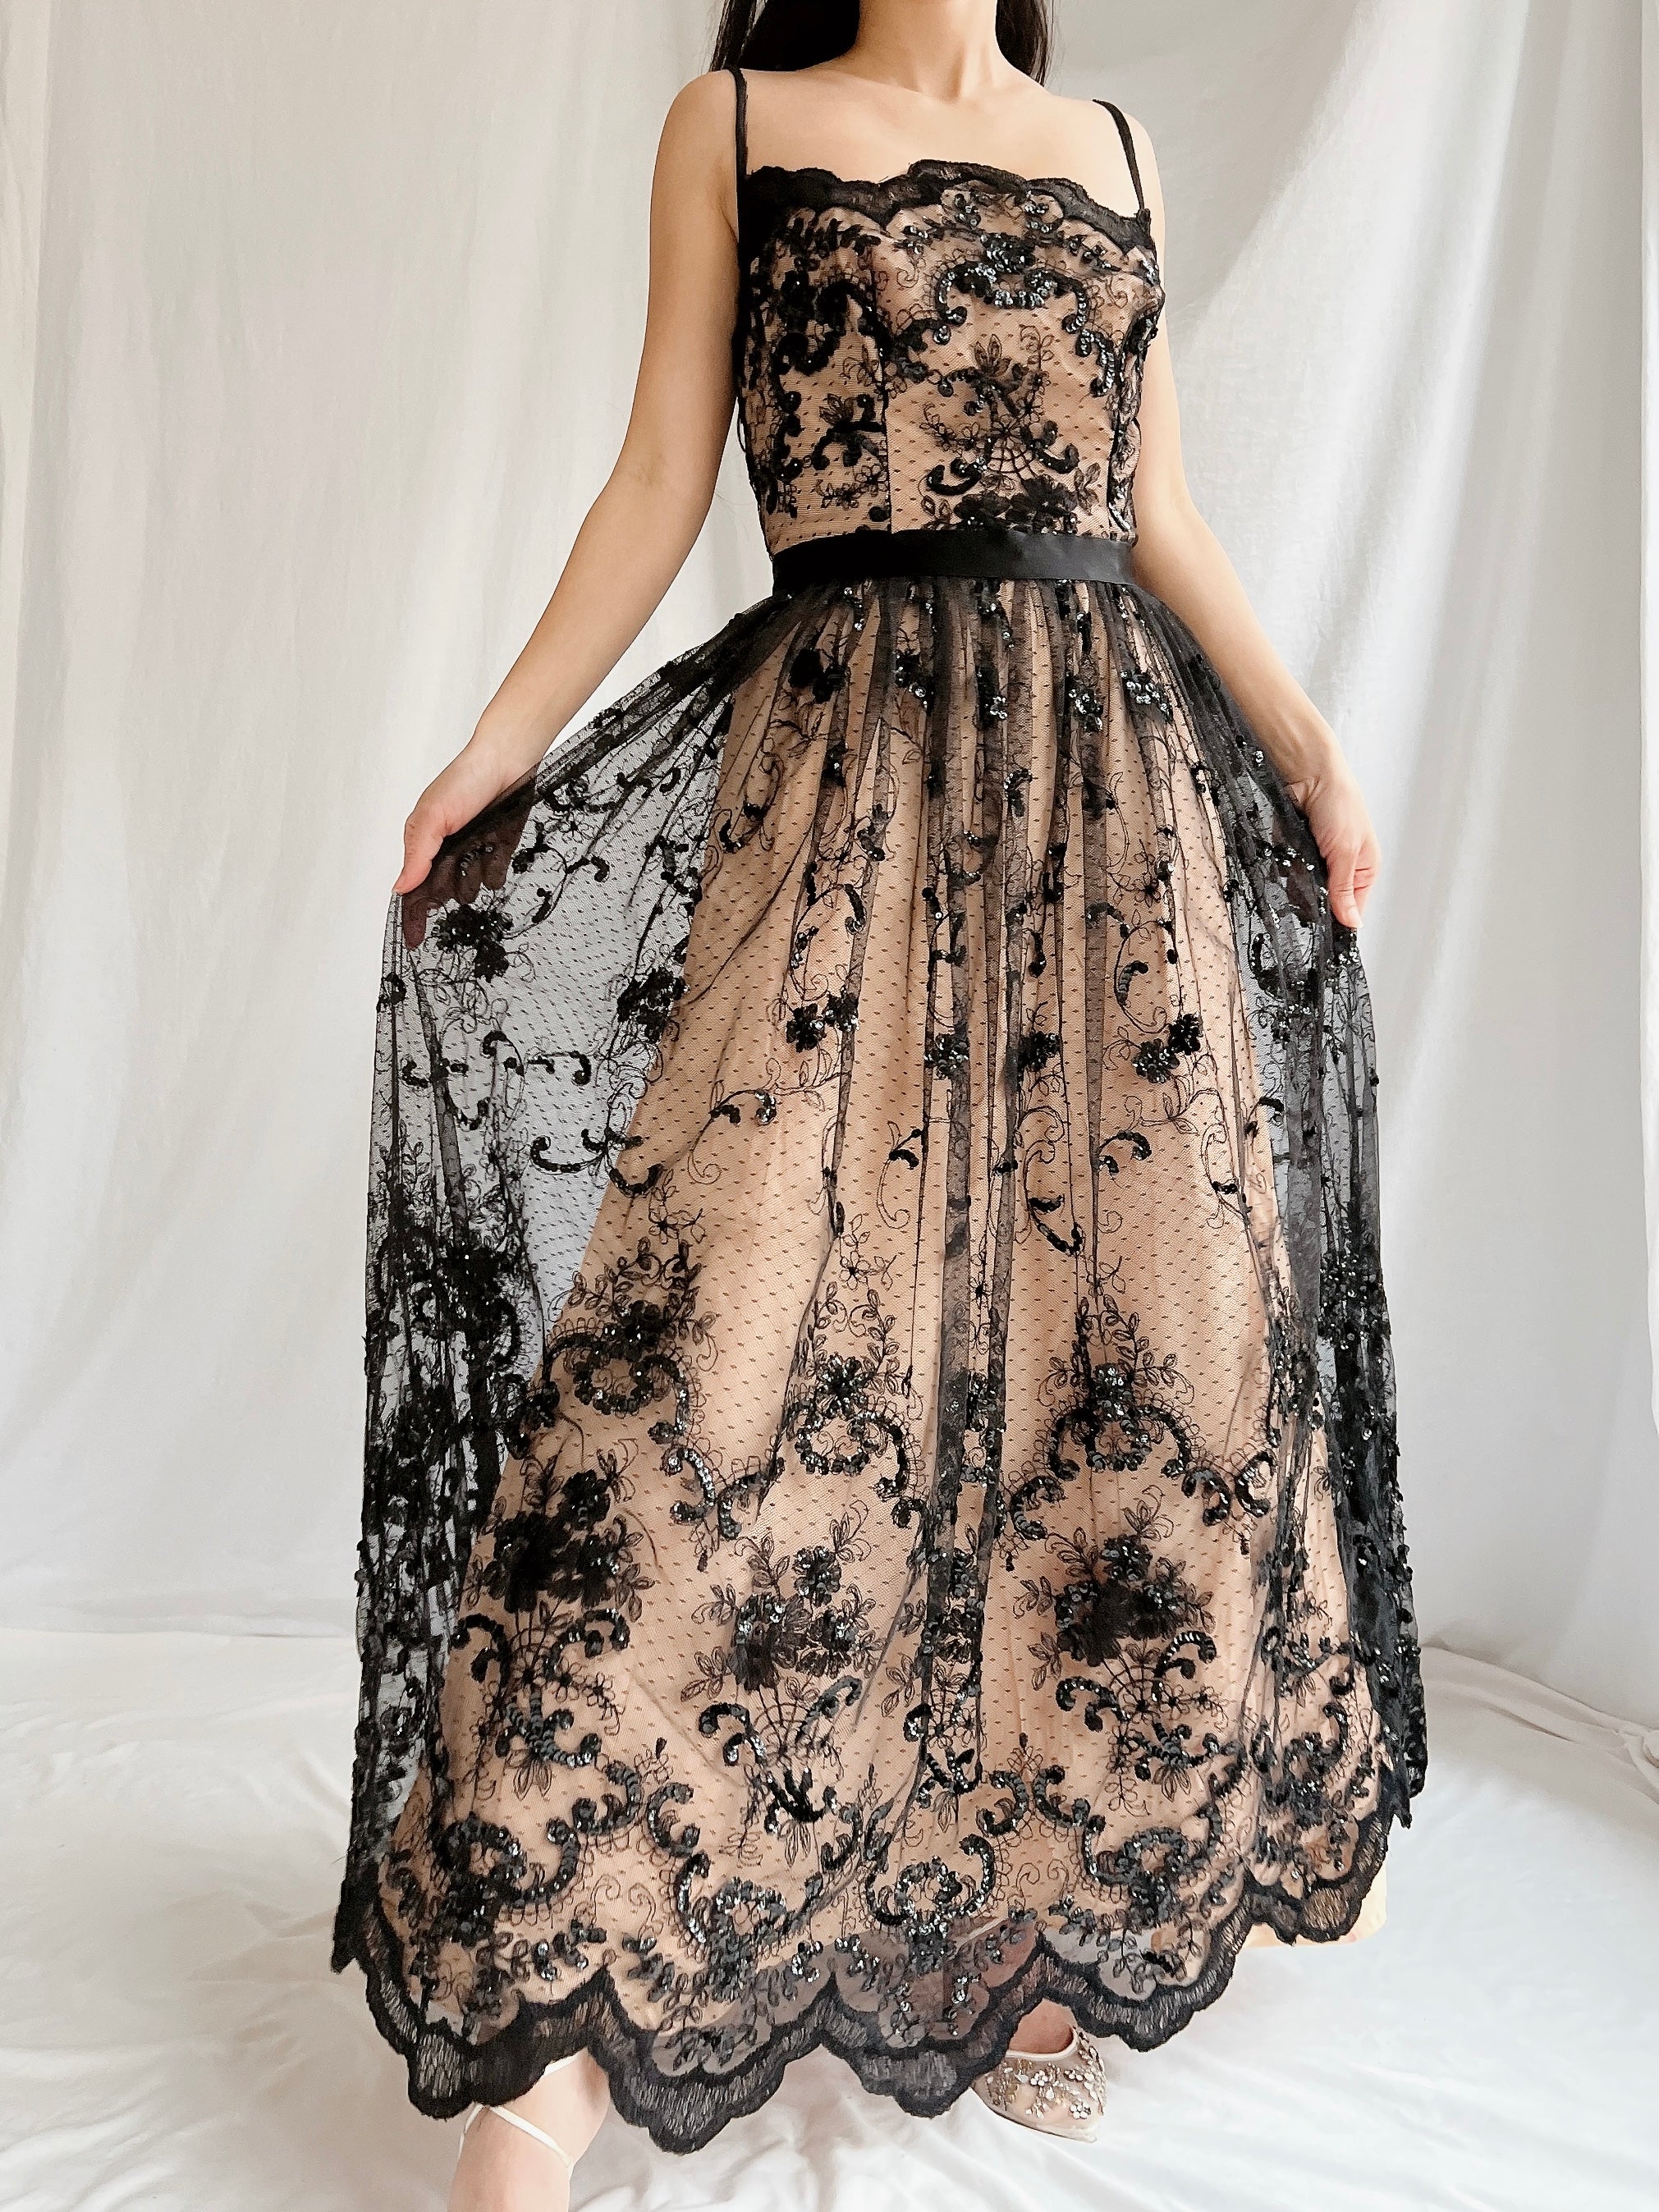 Vintage Nude and Black Lace Dress - S